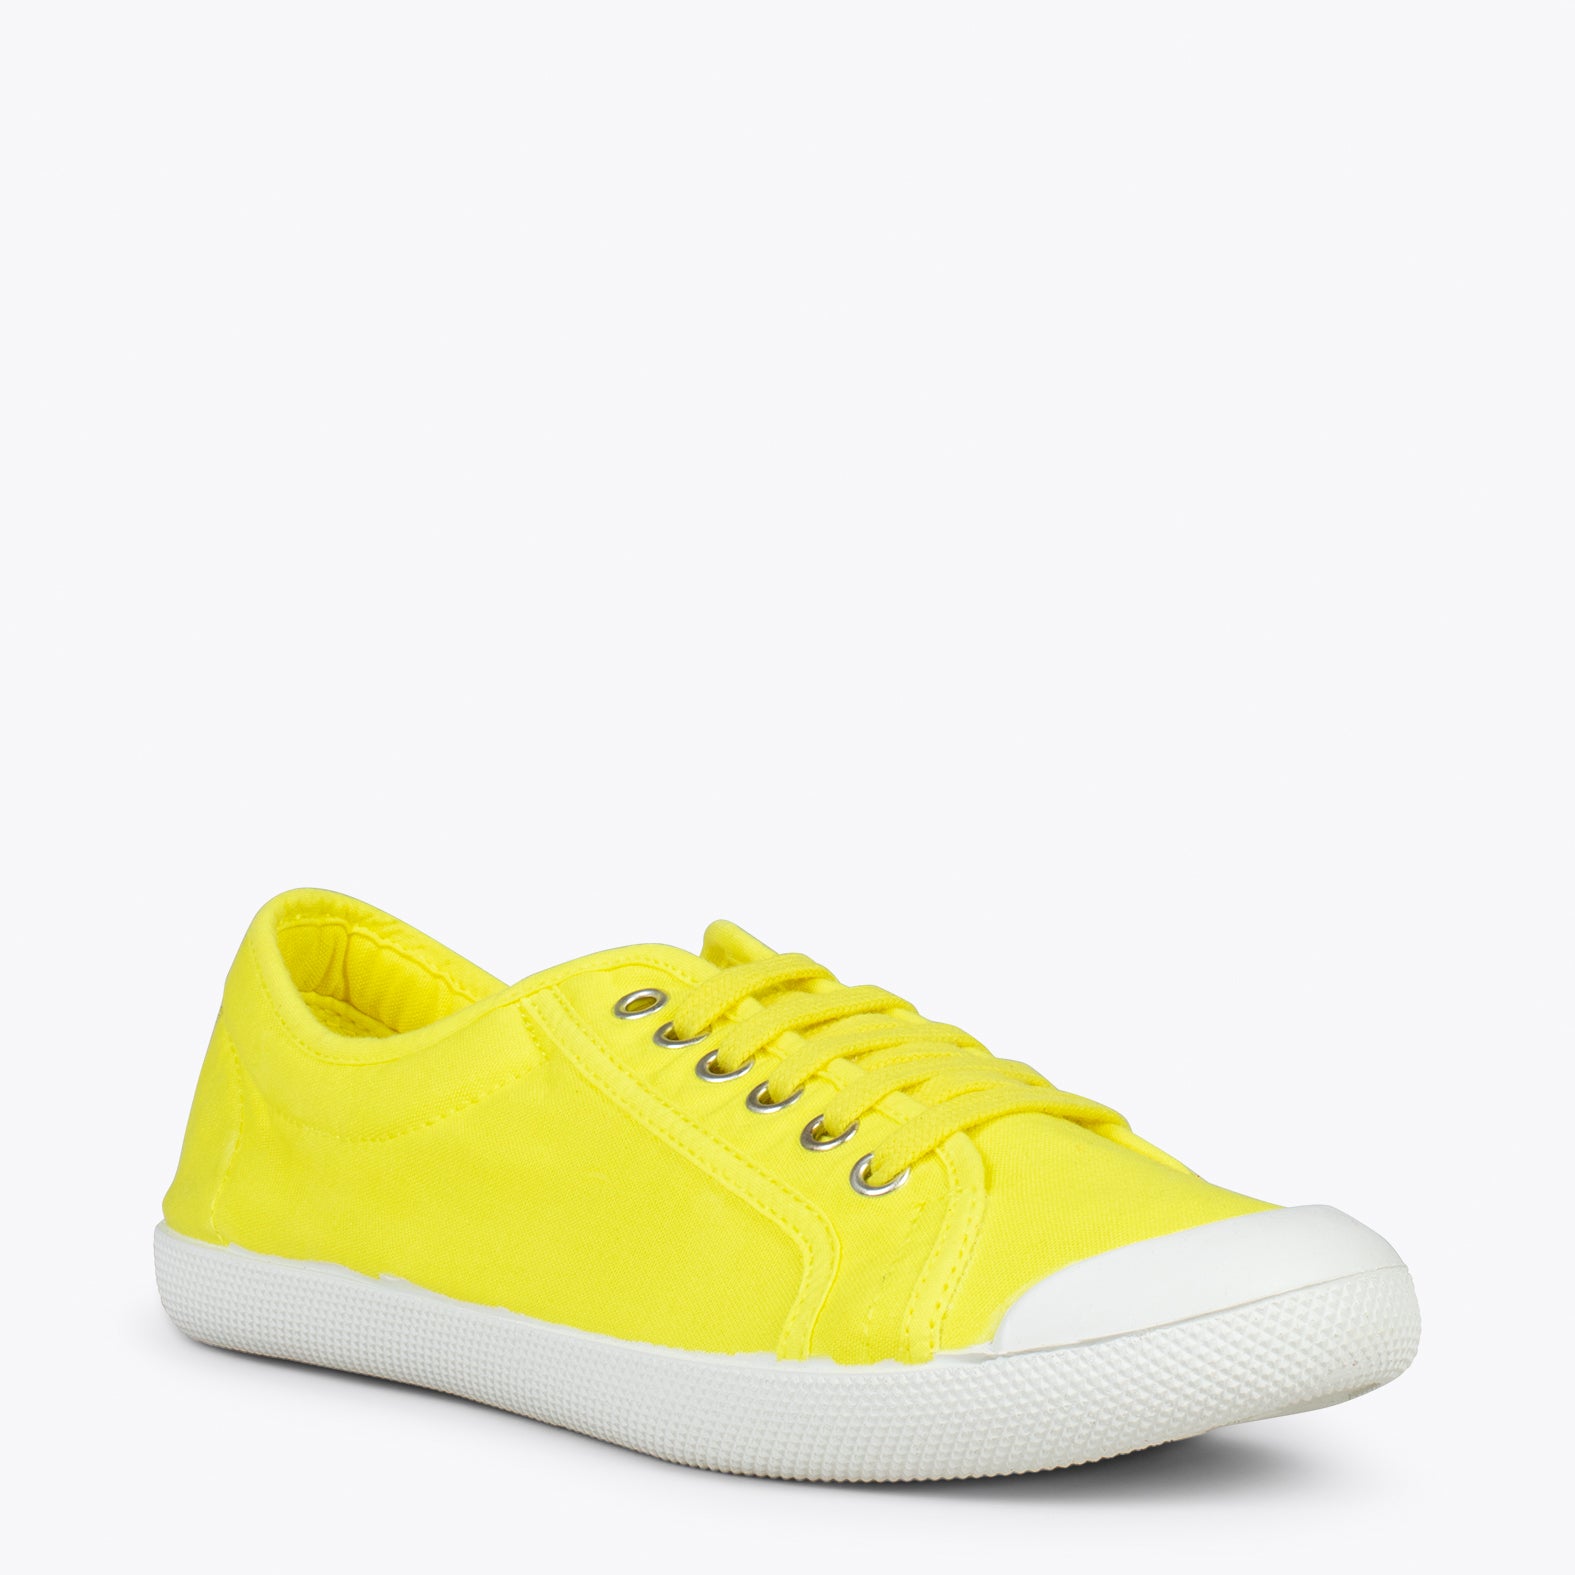 BAOBAB – YELLOW BCI cotton sneakers from IO&GO